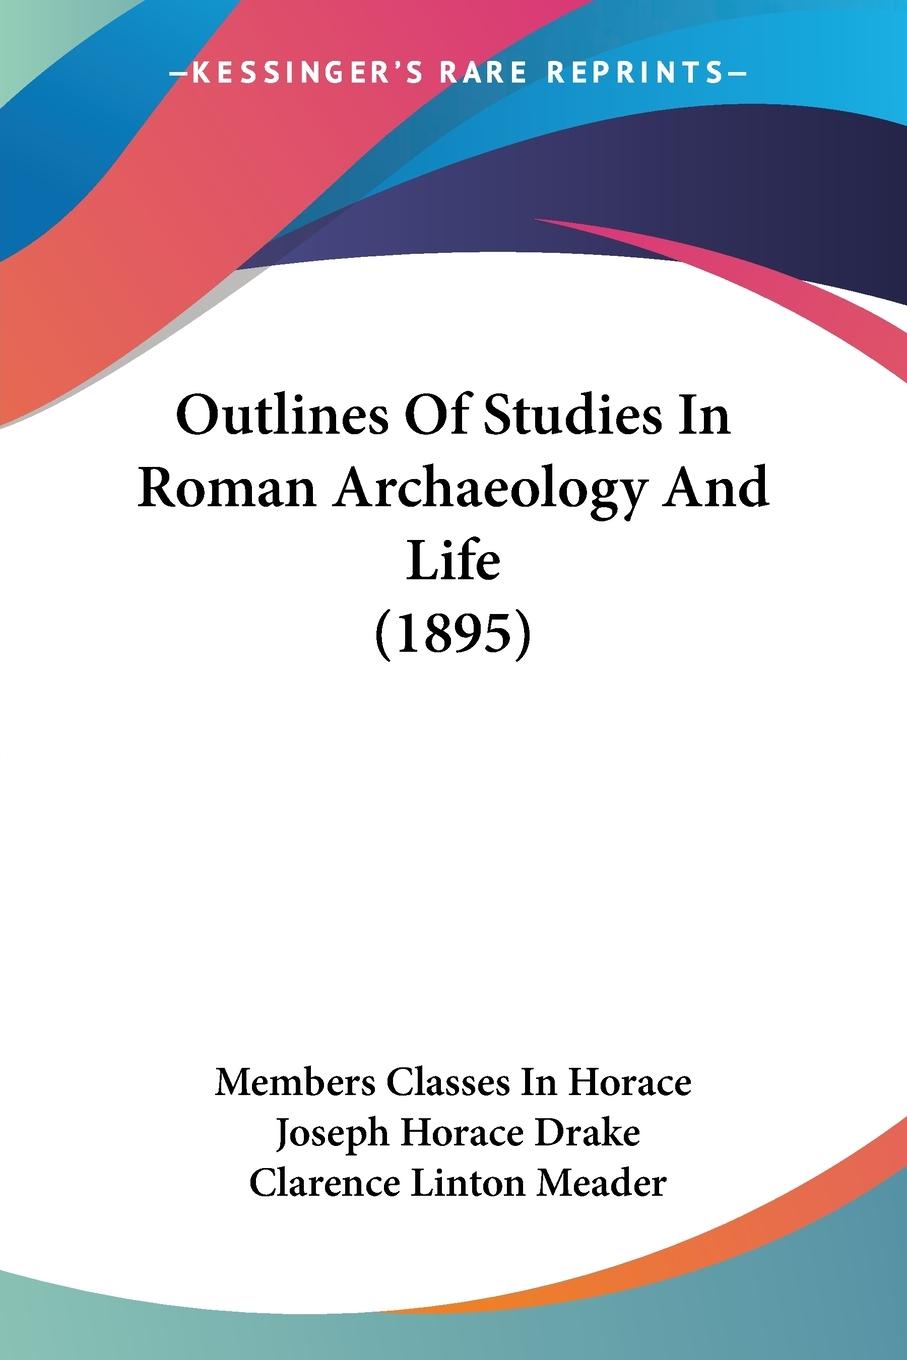 Outlines Of Studies In Roman Archaeology And Life (1895) - Members Classes In Horace Drake, Joseph Horace Meader, Clarence Linton